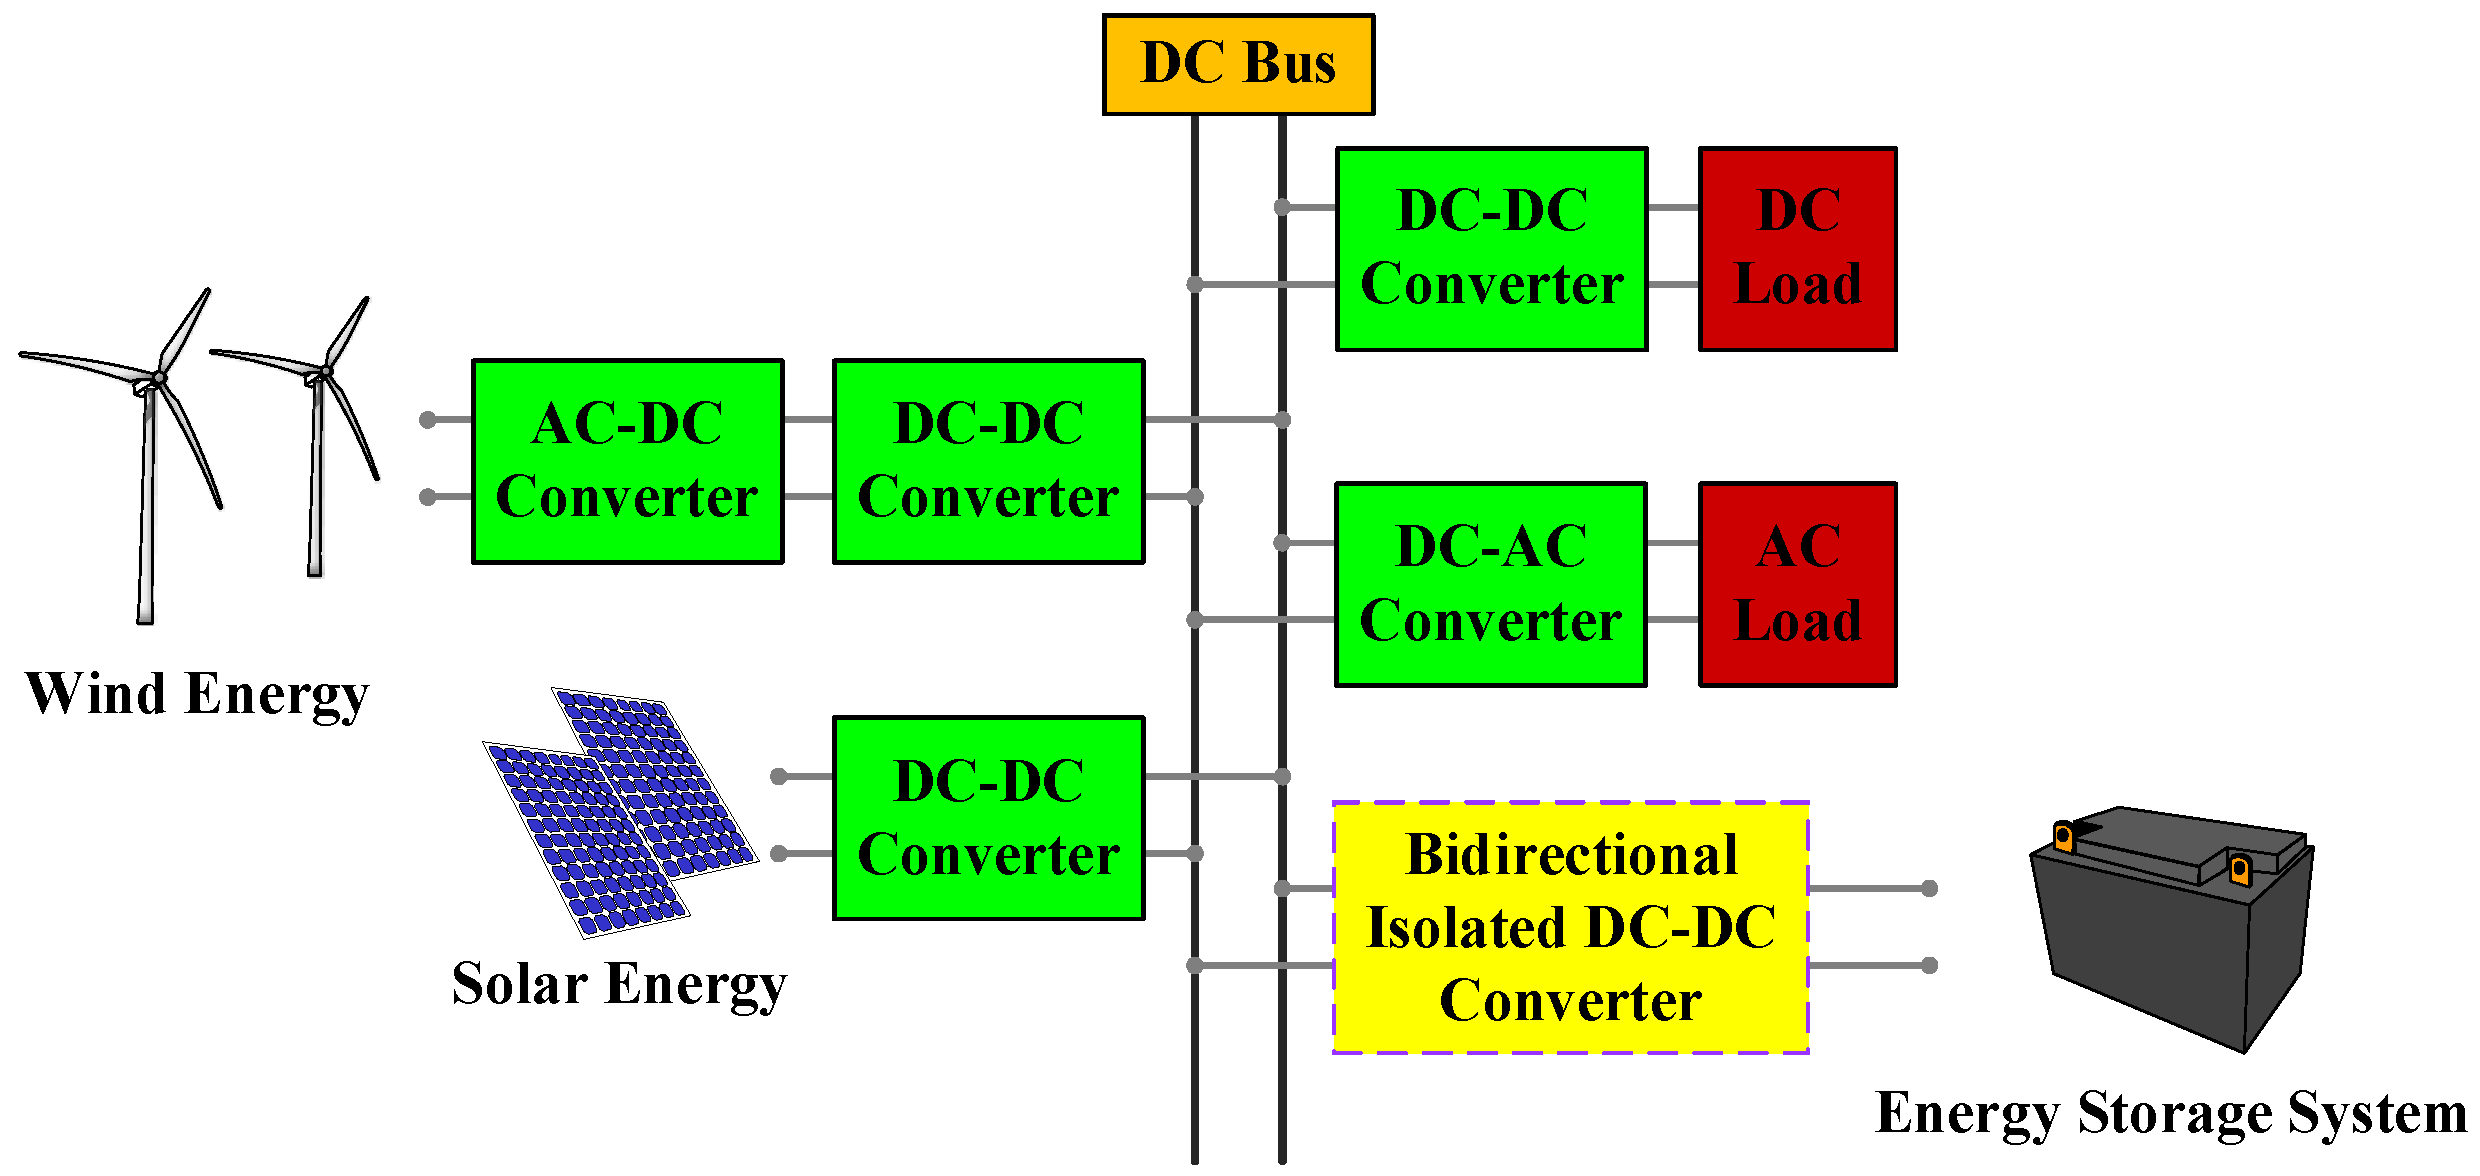 What Is a DC/DC Converter? Part 2, Design Supports